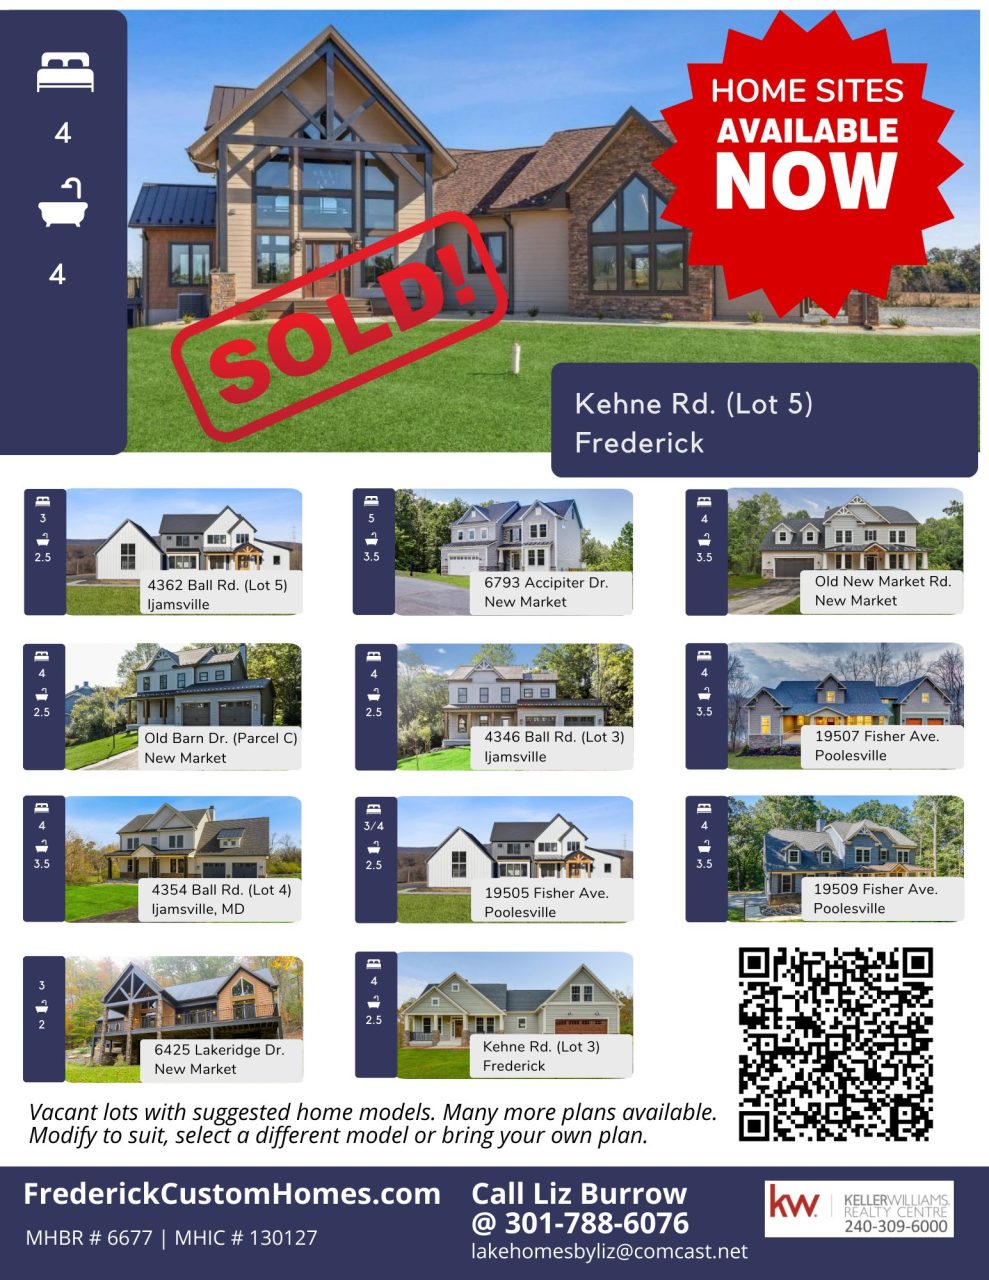 Available home sites